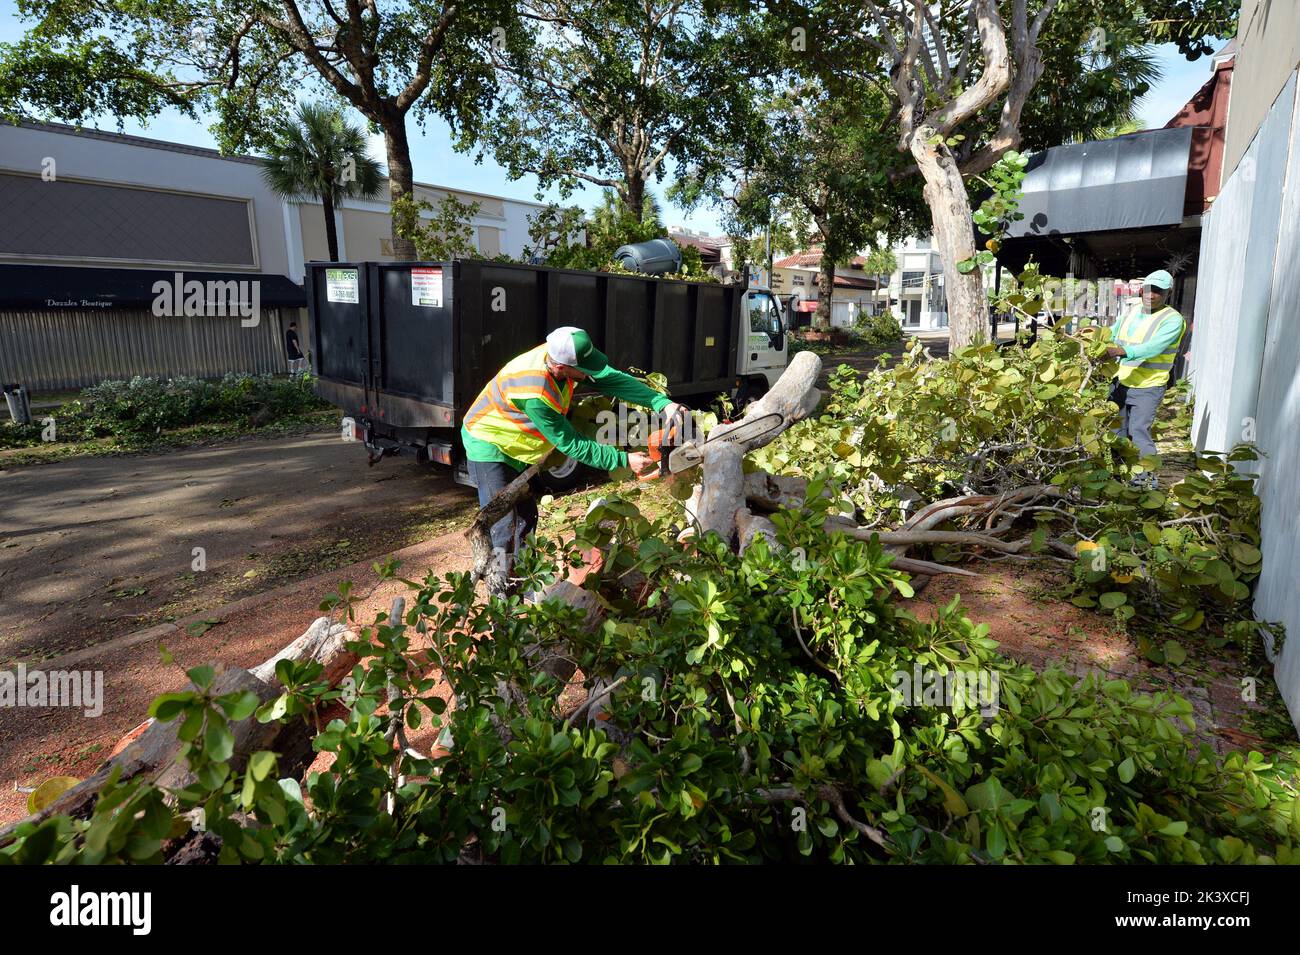 FORT LAUDERDALE, FL - SEPTEMBER 22, 2022: Hurricane Ian makes landfall in Florida as dangerous Category 4 hurricane. Historic File photos of Hurricanes in South Florida People: Hurricane Destruction Credit: Storms Media Group/Alamy Live News Stock Photo